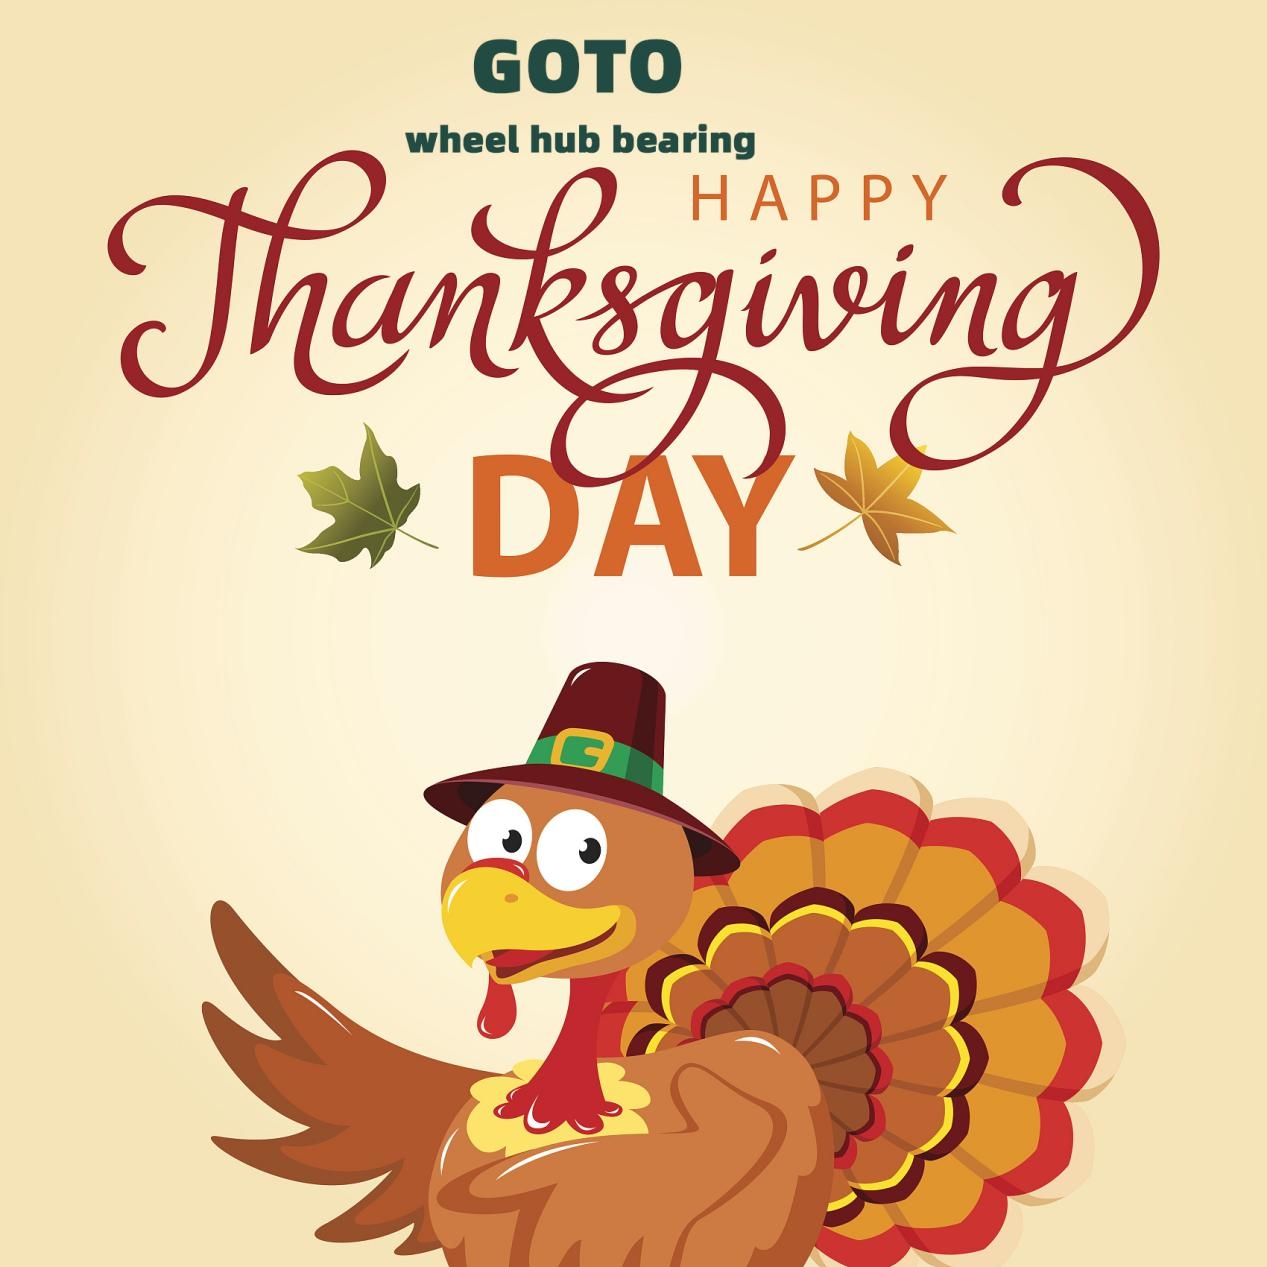 GOTO wishes you and your family a wonderful holiday filled with the warmth and happiness